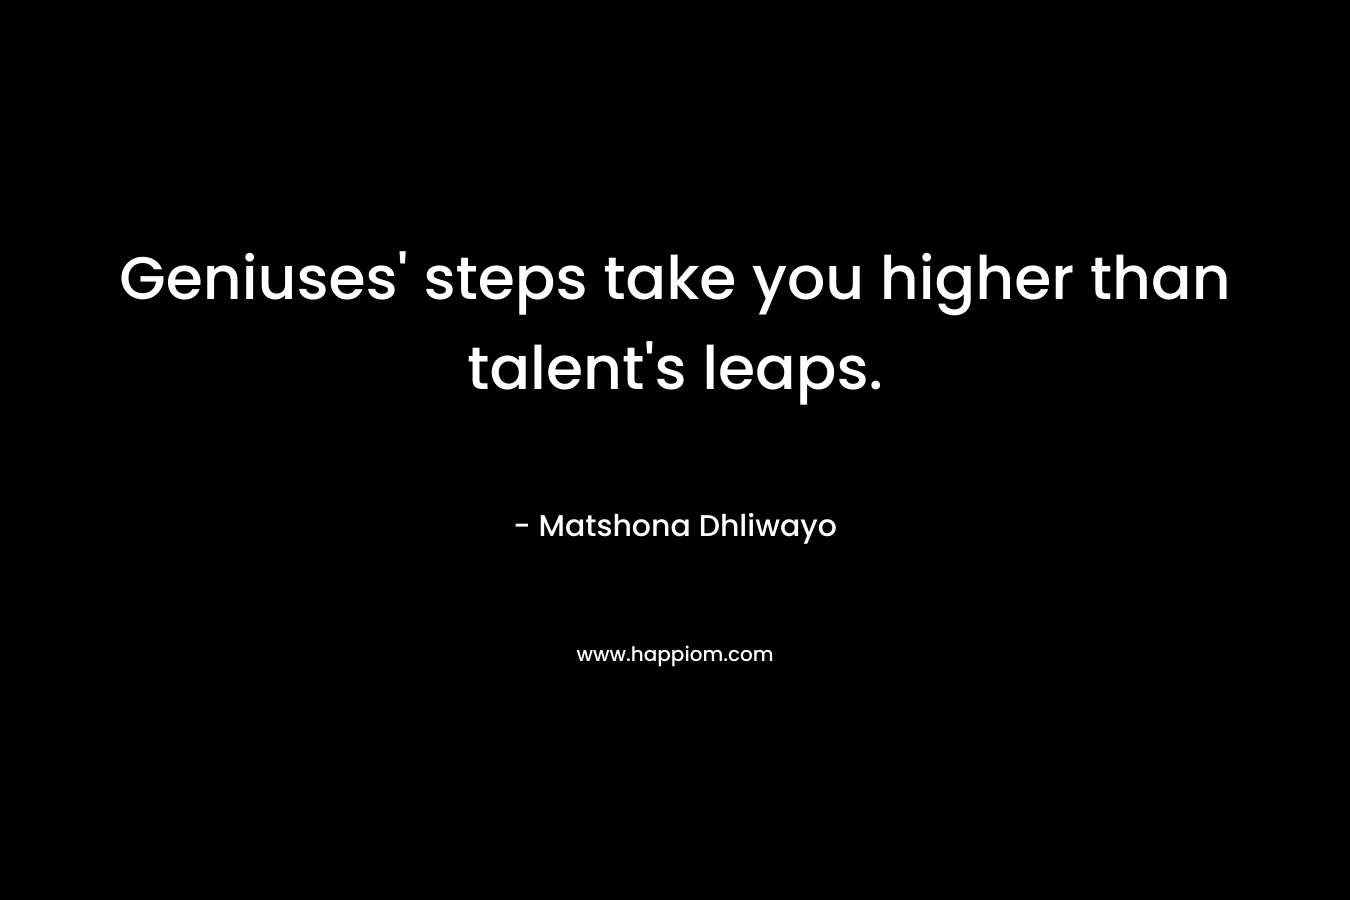 Geniuses' steps take you higher than talent's leaps.